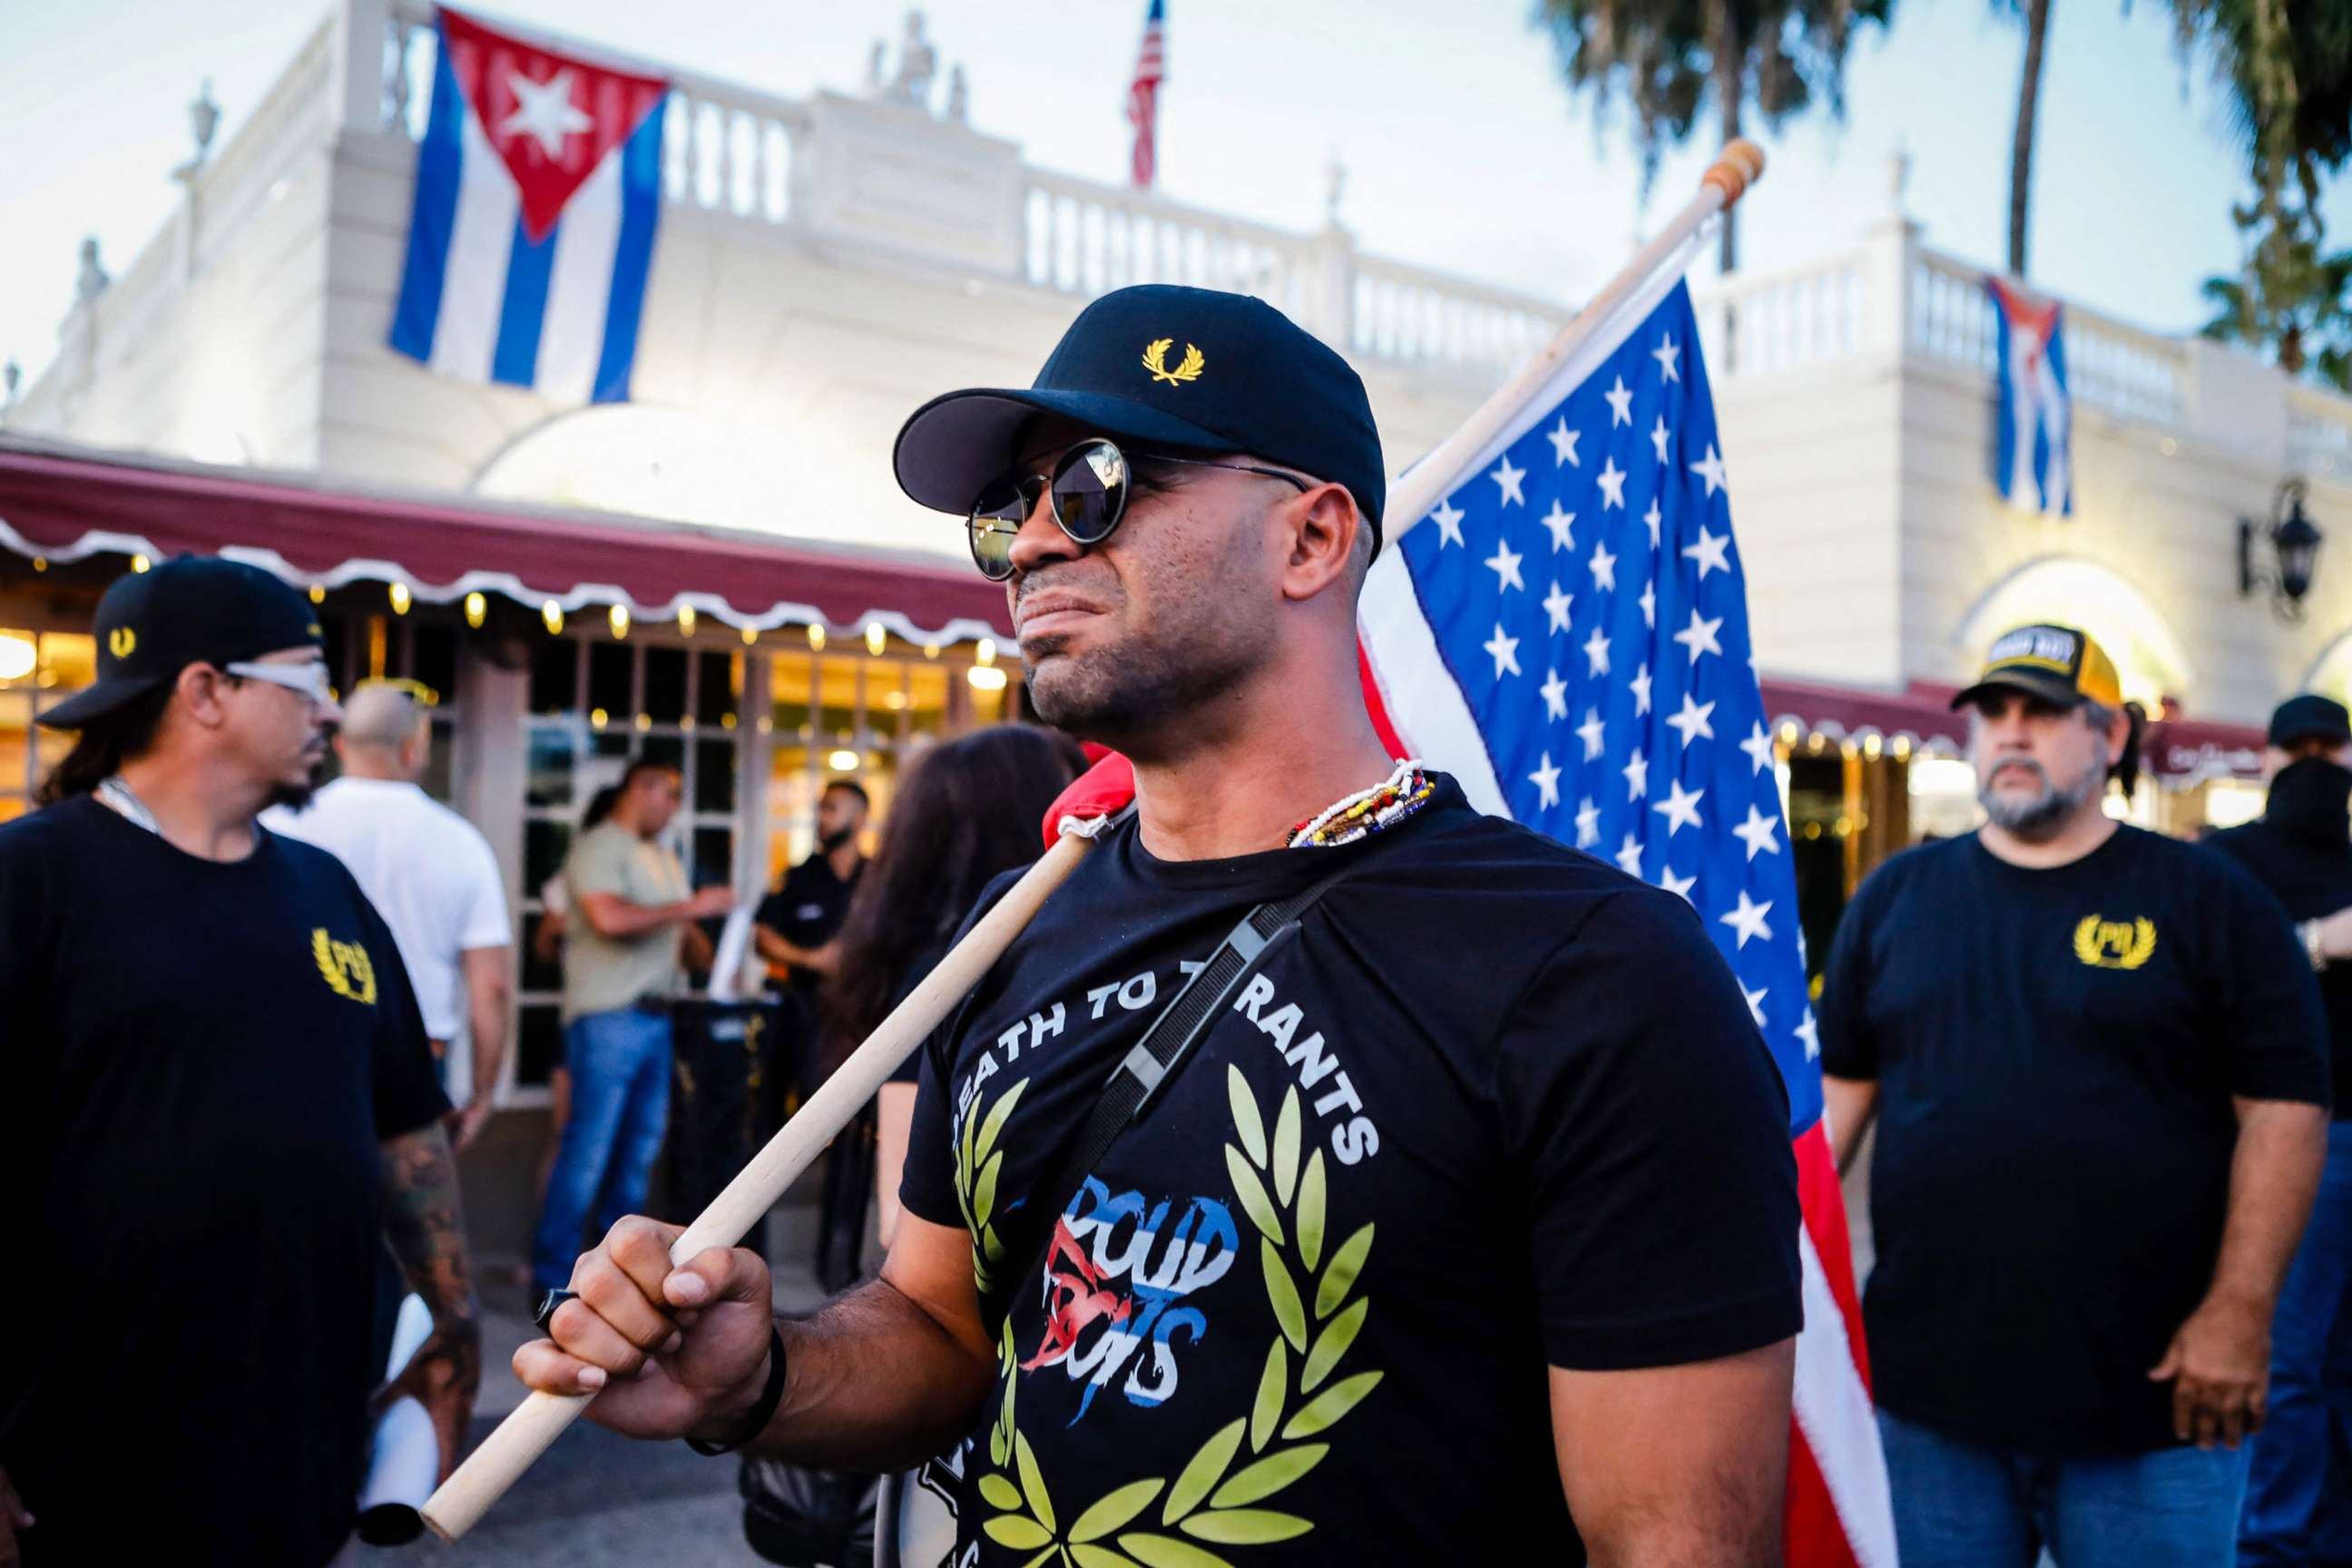 PHOTO: Henry "Enrique" Tarrio, leader of The Proud Boys, holds an American flag during a protest in Miami, July 16, 2021.